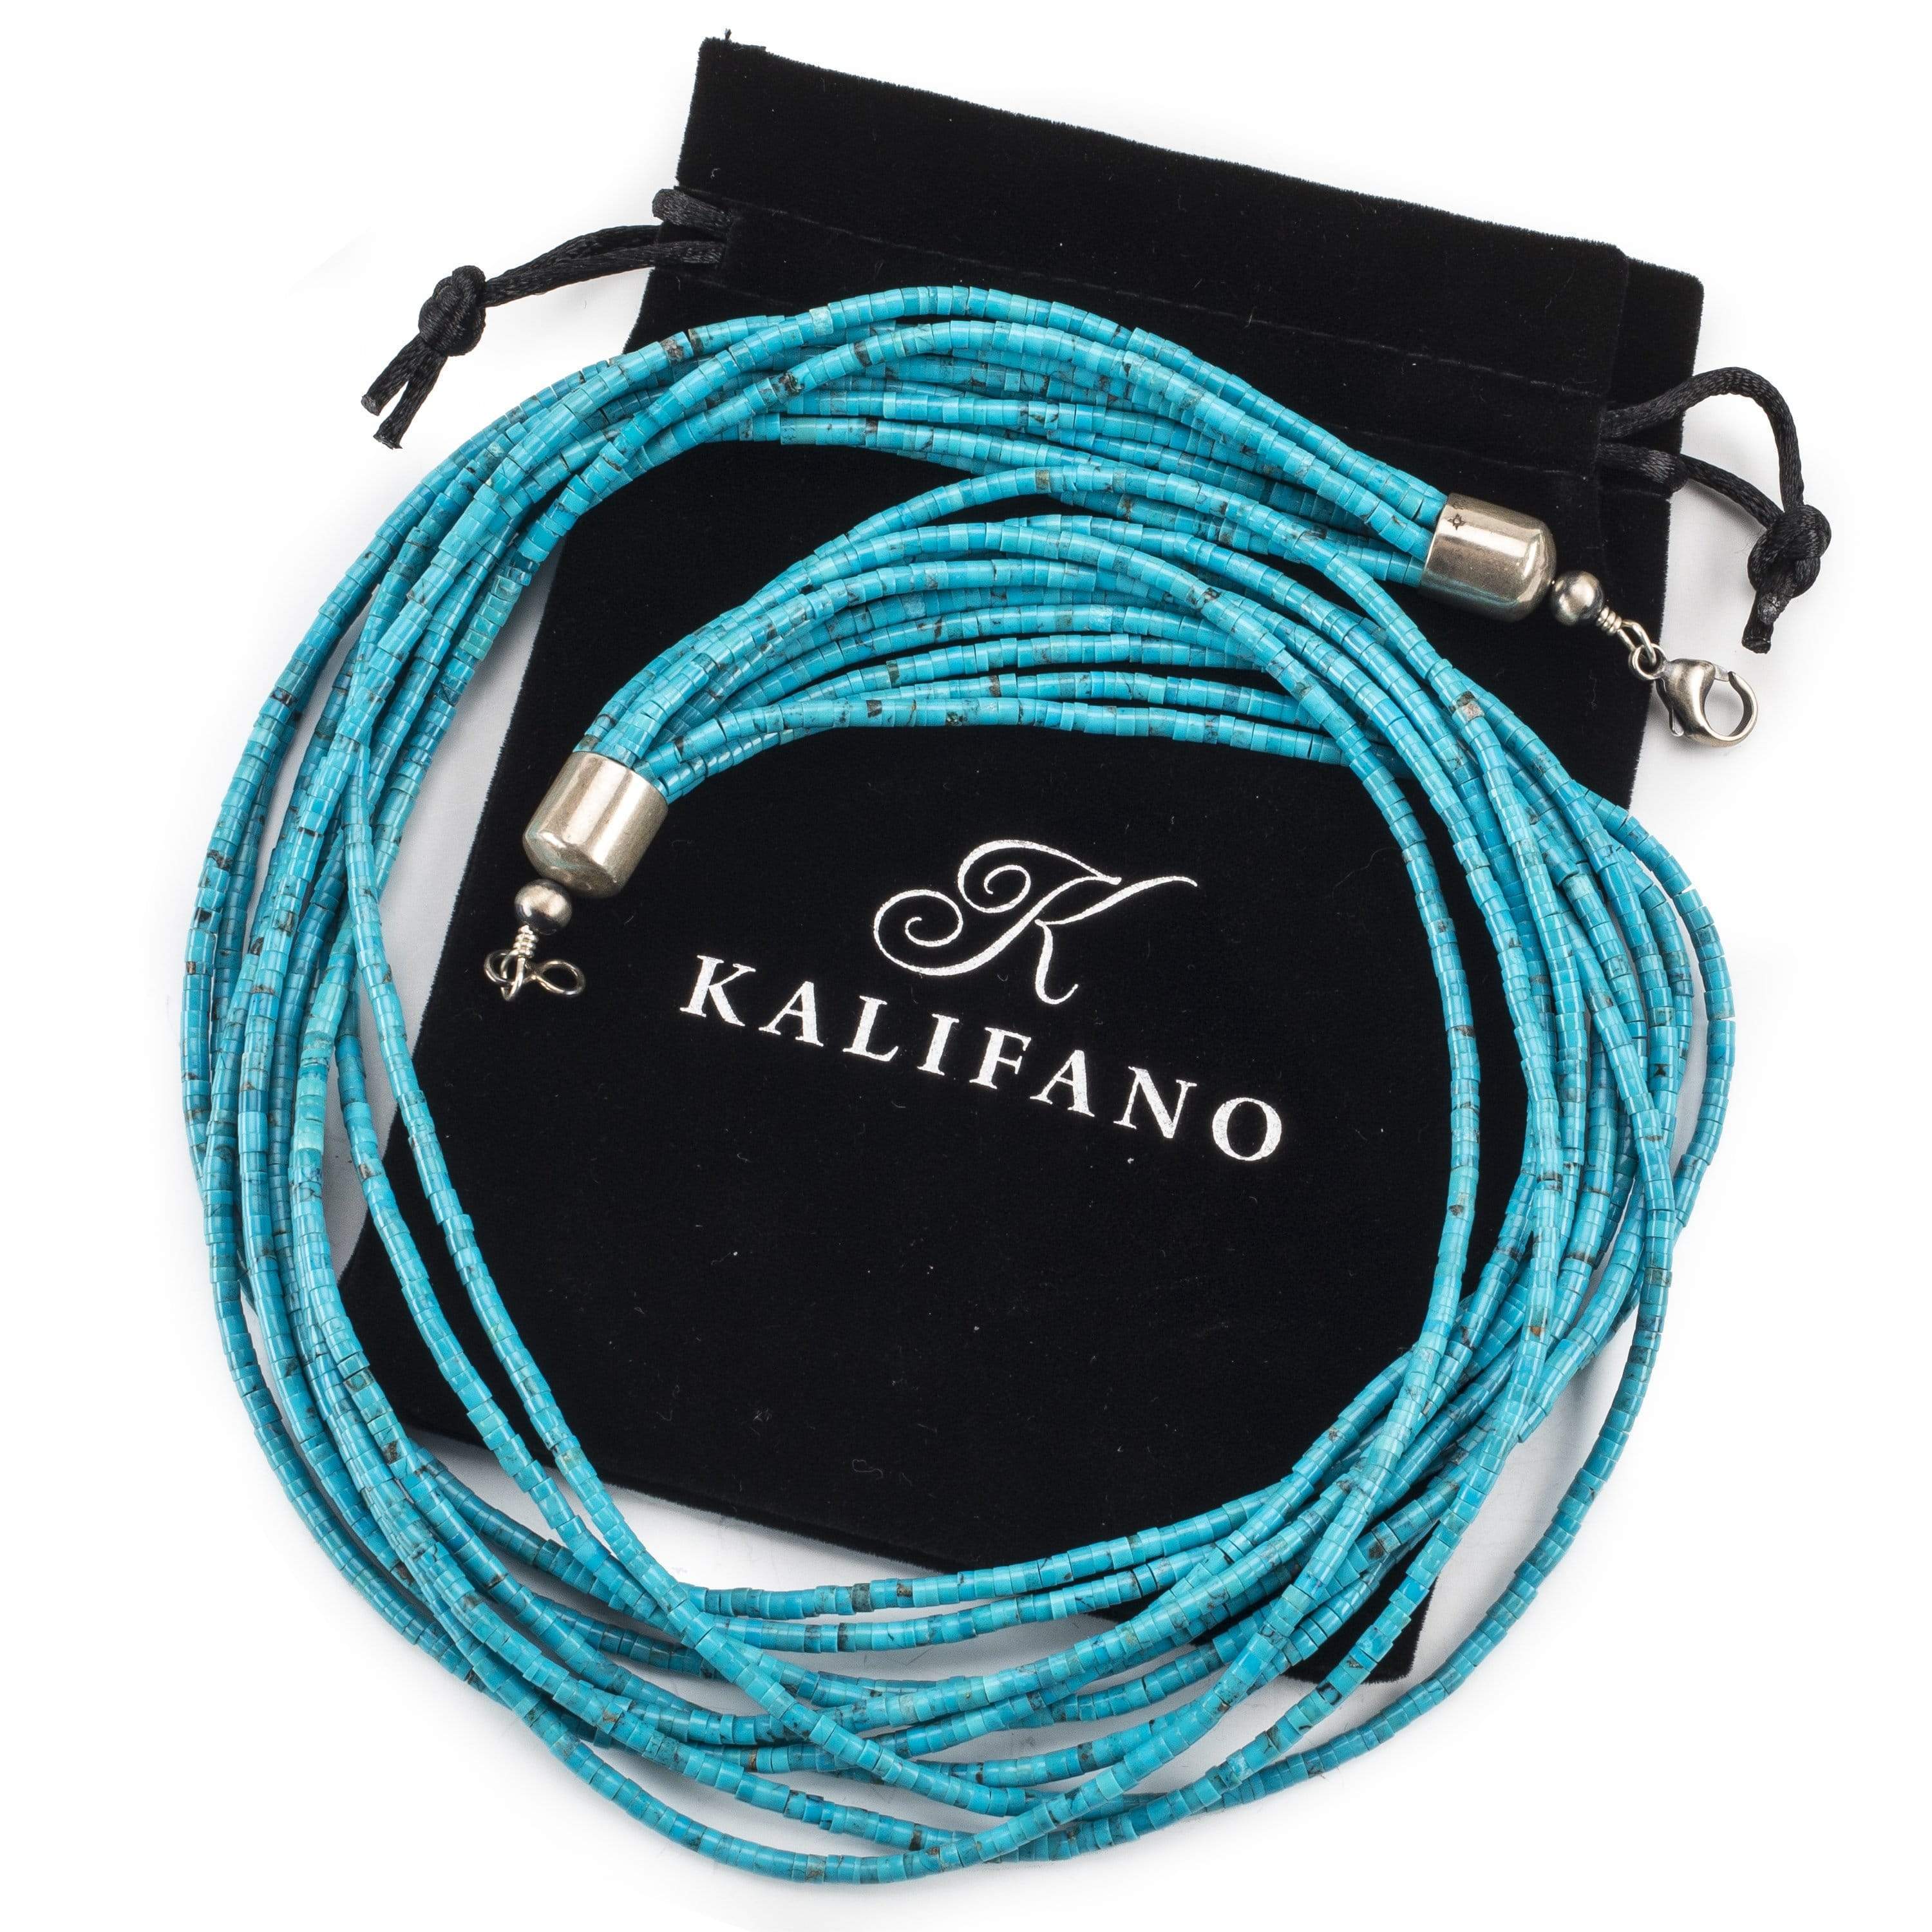 Kalifano Native American Jewelry 24" Ten Strand Genuine Turquoise USA Native American Made 925 Sterling Silver Necklace NAN1800.003